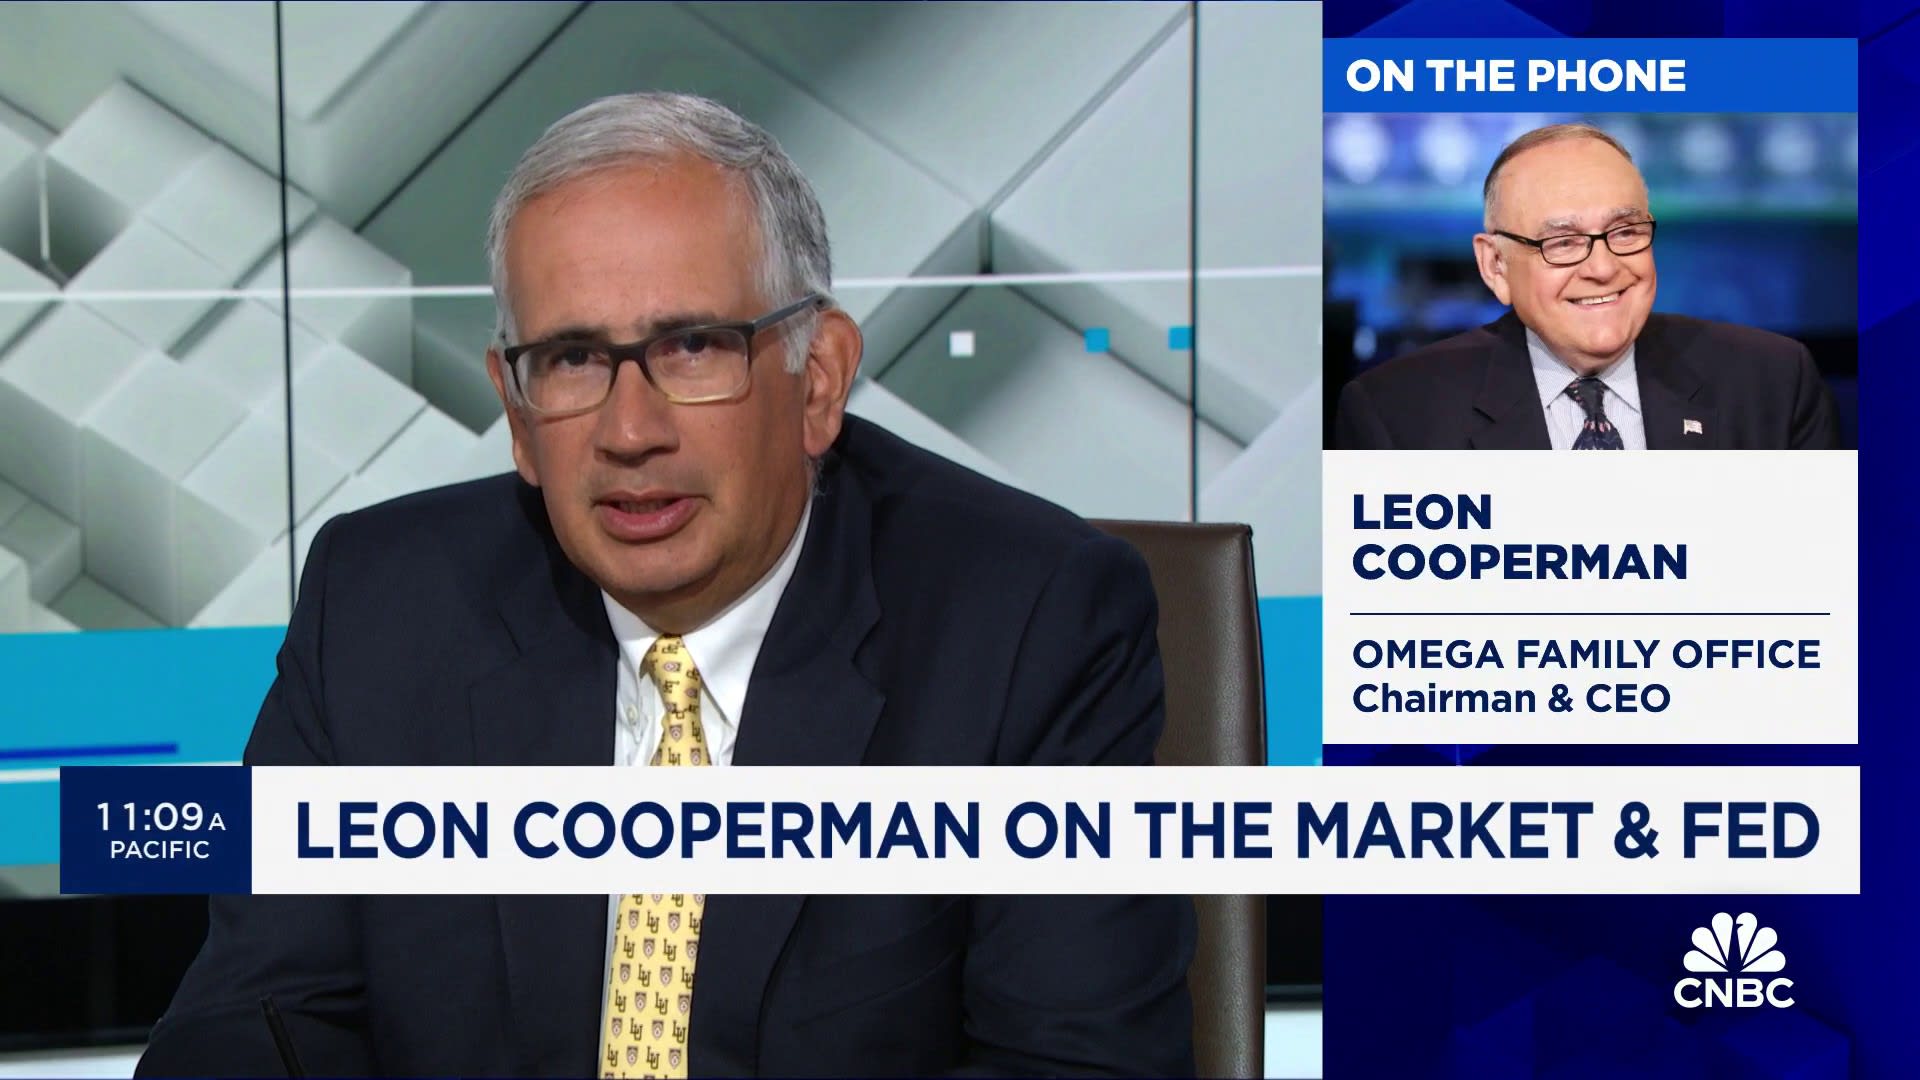 Watch CNBCs full interview with DCLA’s Sarat Sethi and Omega’s Leon Cooperman [Video]